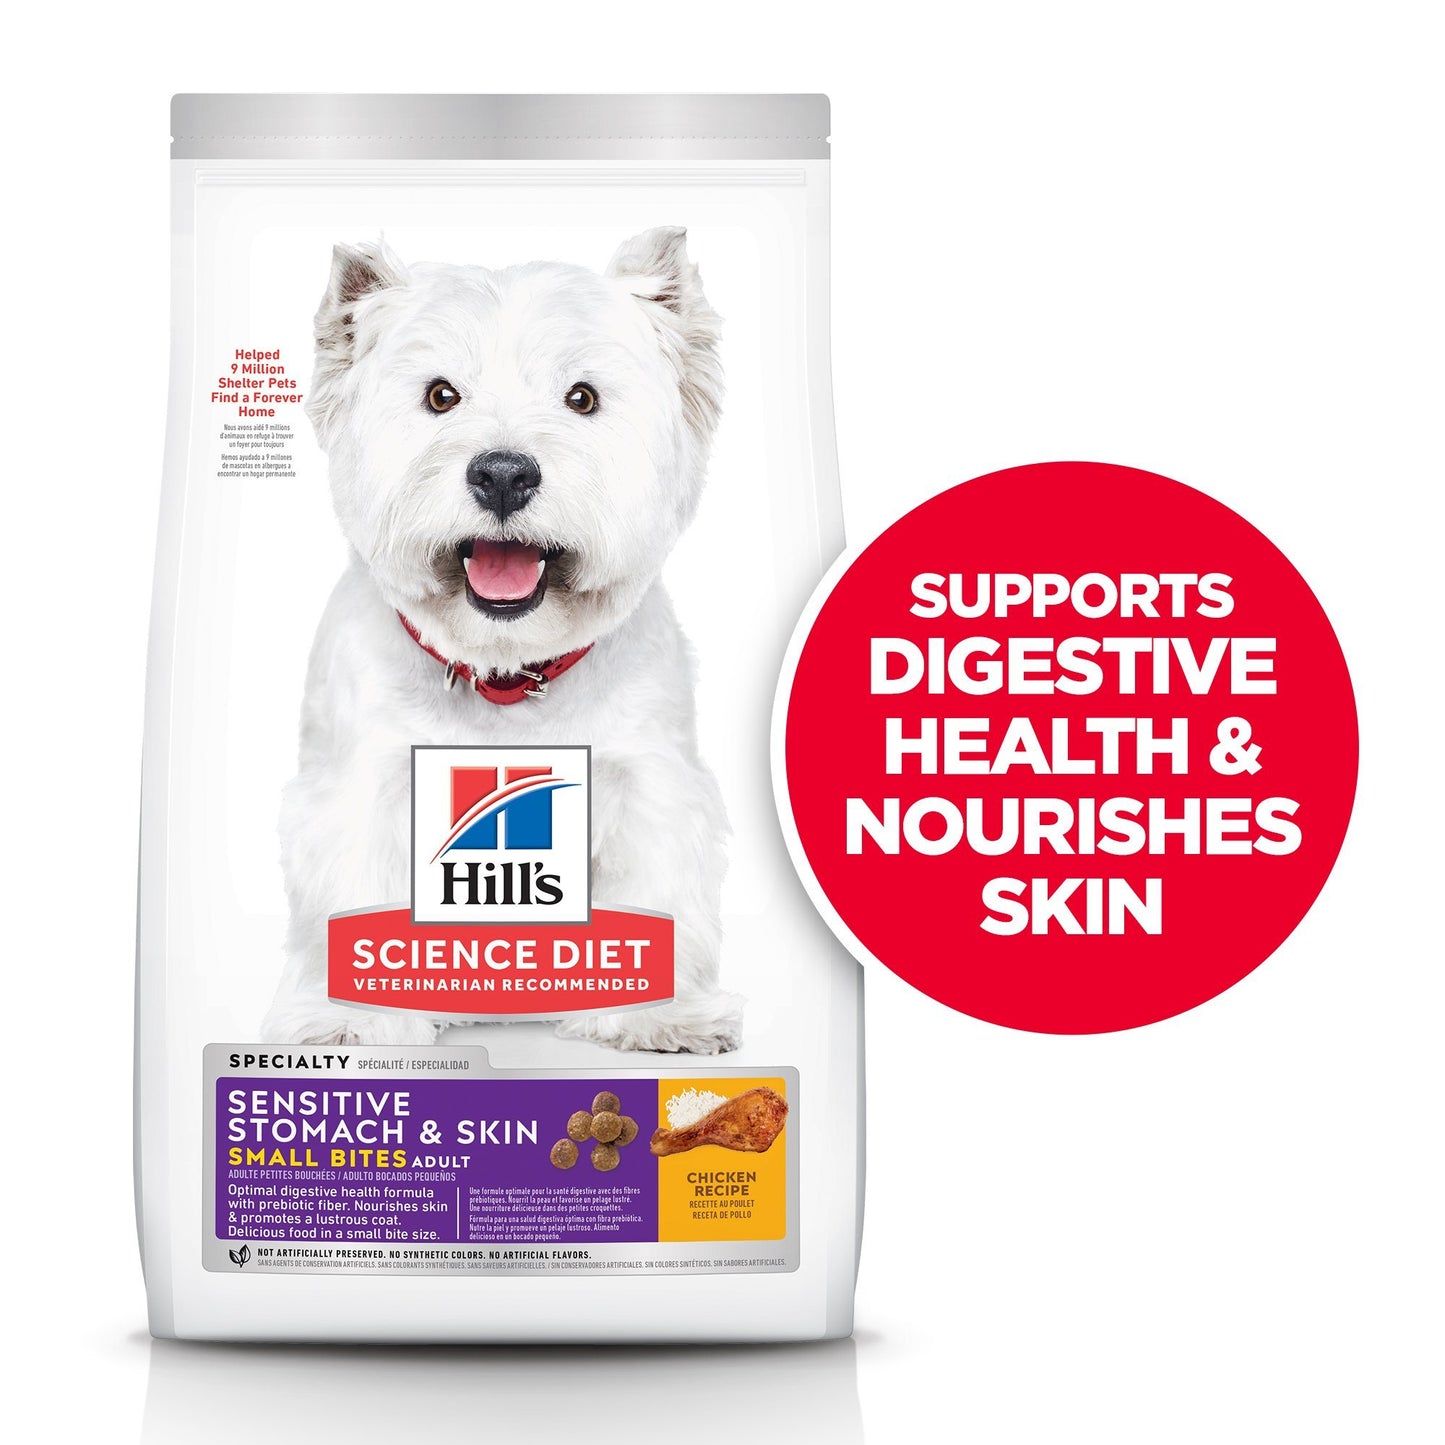 Hill's Science Diet Adult Sensitive Stomach & Skin Small Bites Dry Dog Food, Chicken Recipe, 1.81 Kg Bag  Dog Food  | PetMax Canada